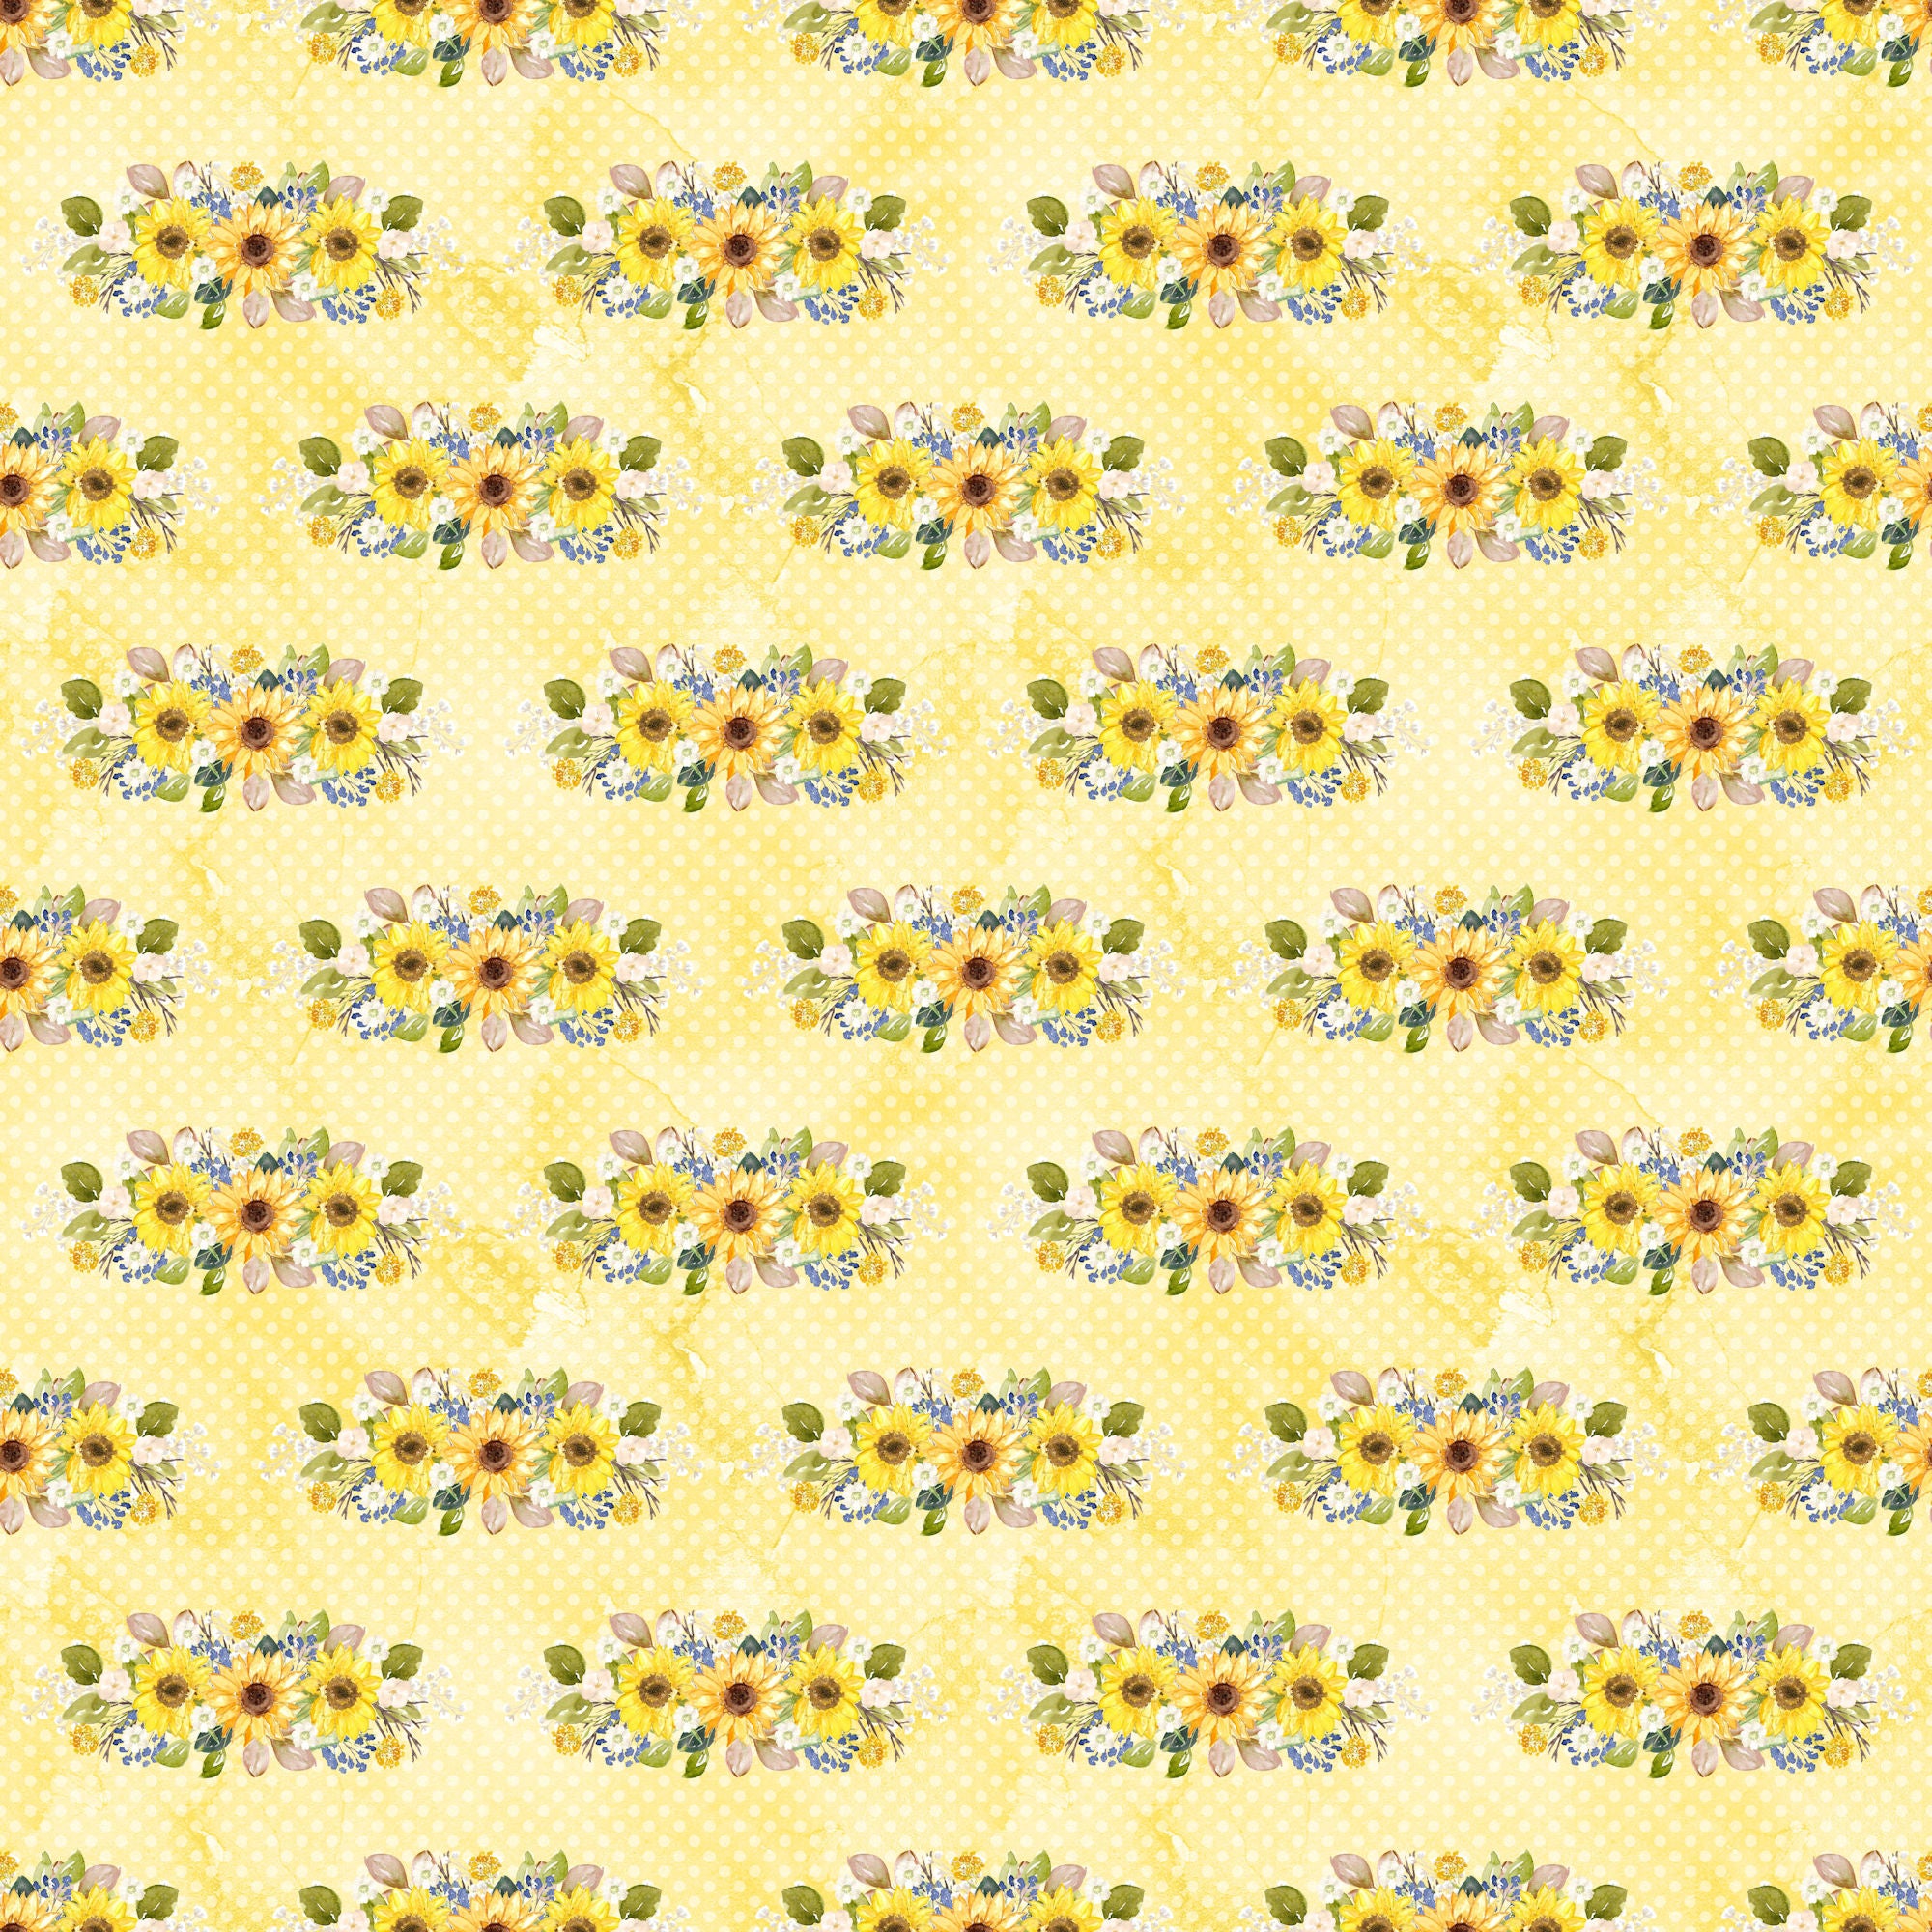 Bumblebee Fall Collection Busy Bees 12 x 12 Double-Sided Scrapbook Paper by SSC Designs